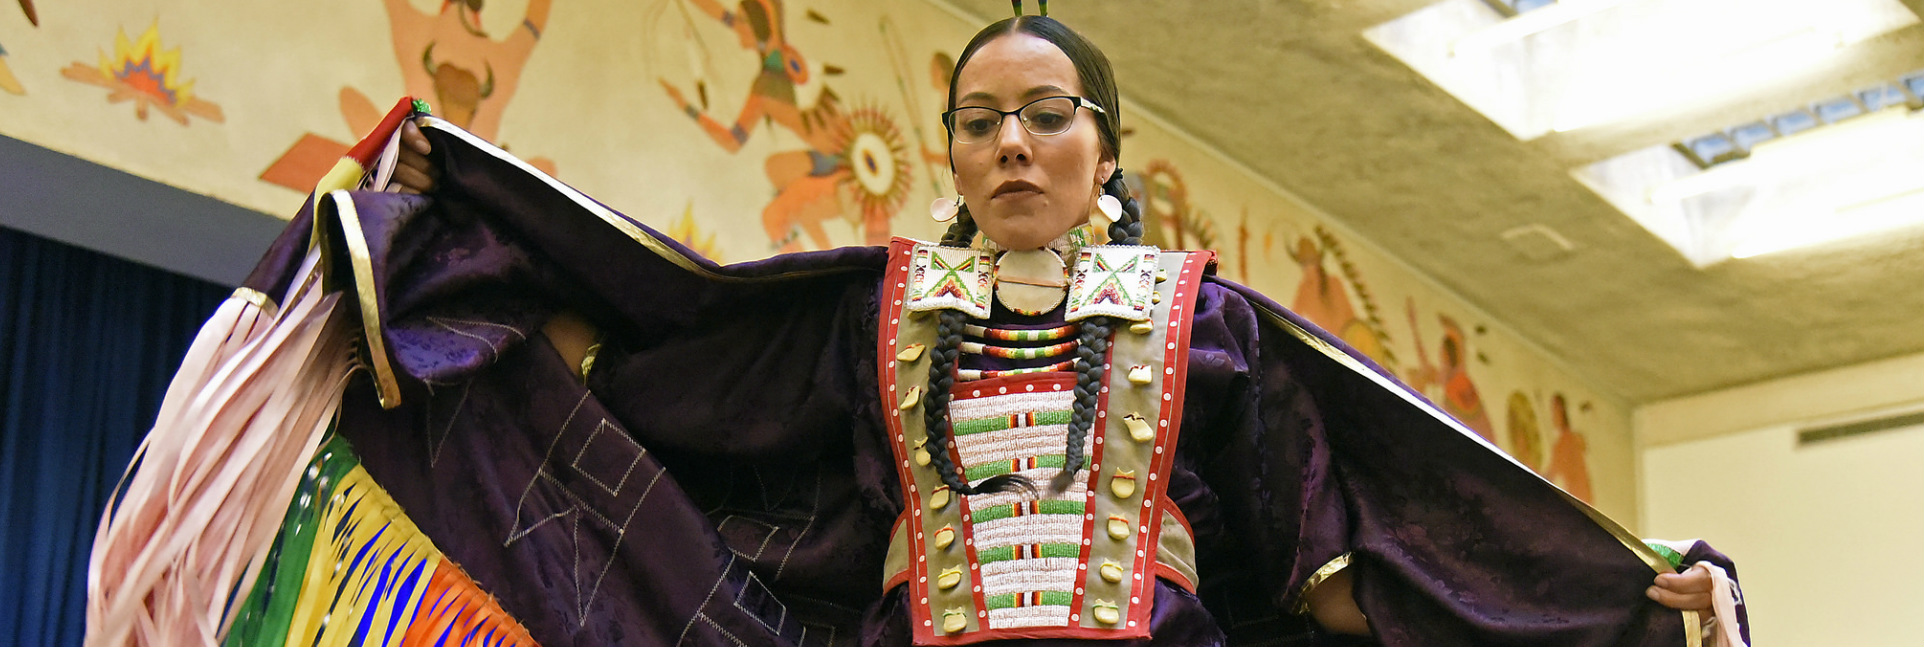 A Native American woman in elaborate traditional clothes dances in front of a Native American mural in a large room.